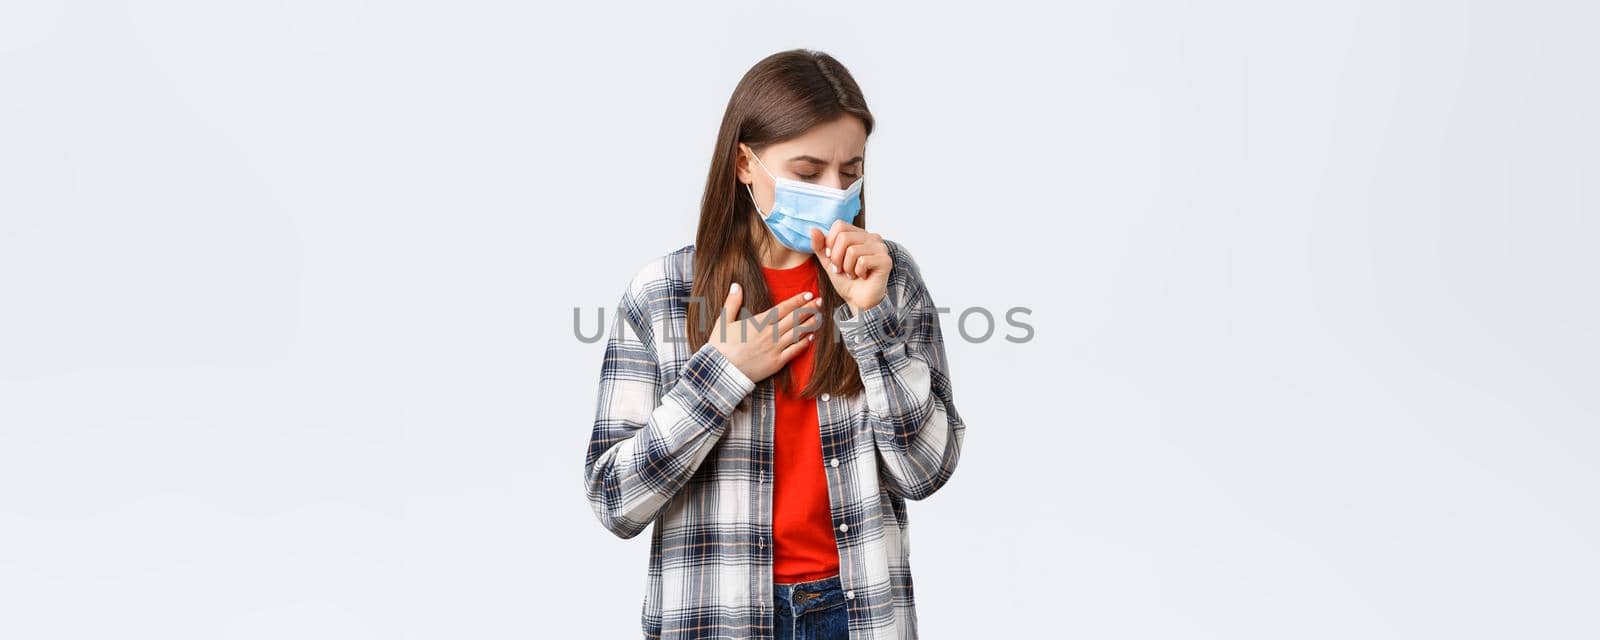 Coronavirus outbreak, leisure on quarantine, social distancing and emotions concept. Woman in medical mask coughing, feeling sick, touching lungs, have covid-19 symptoms, being ill.